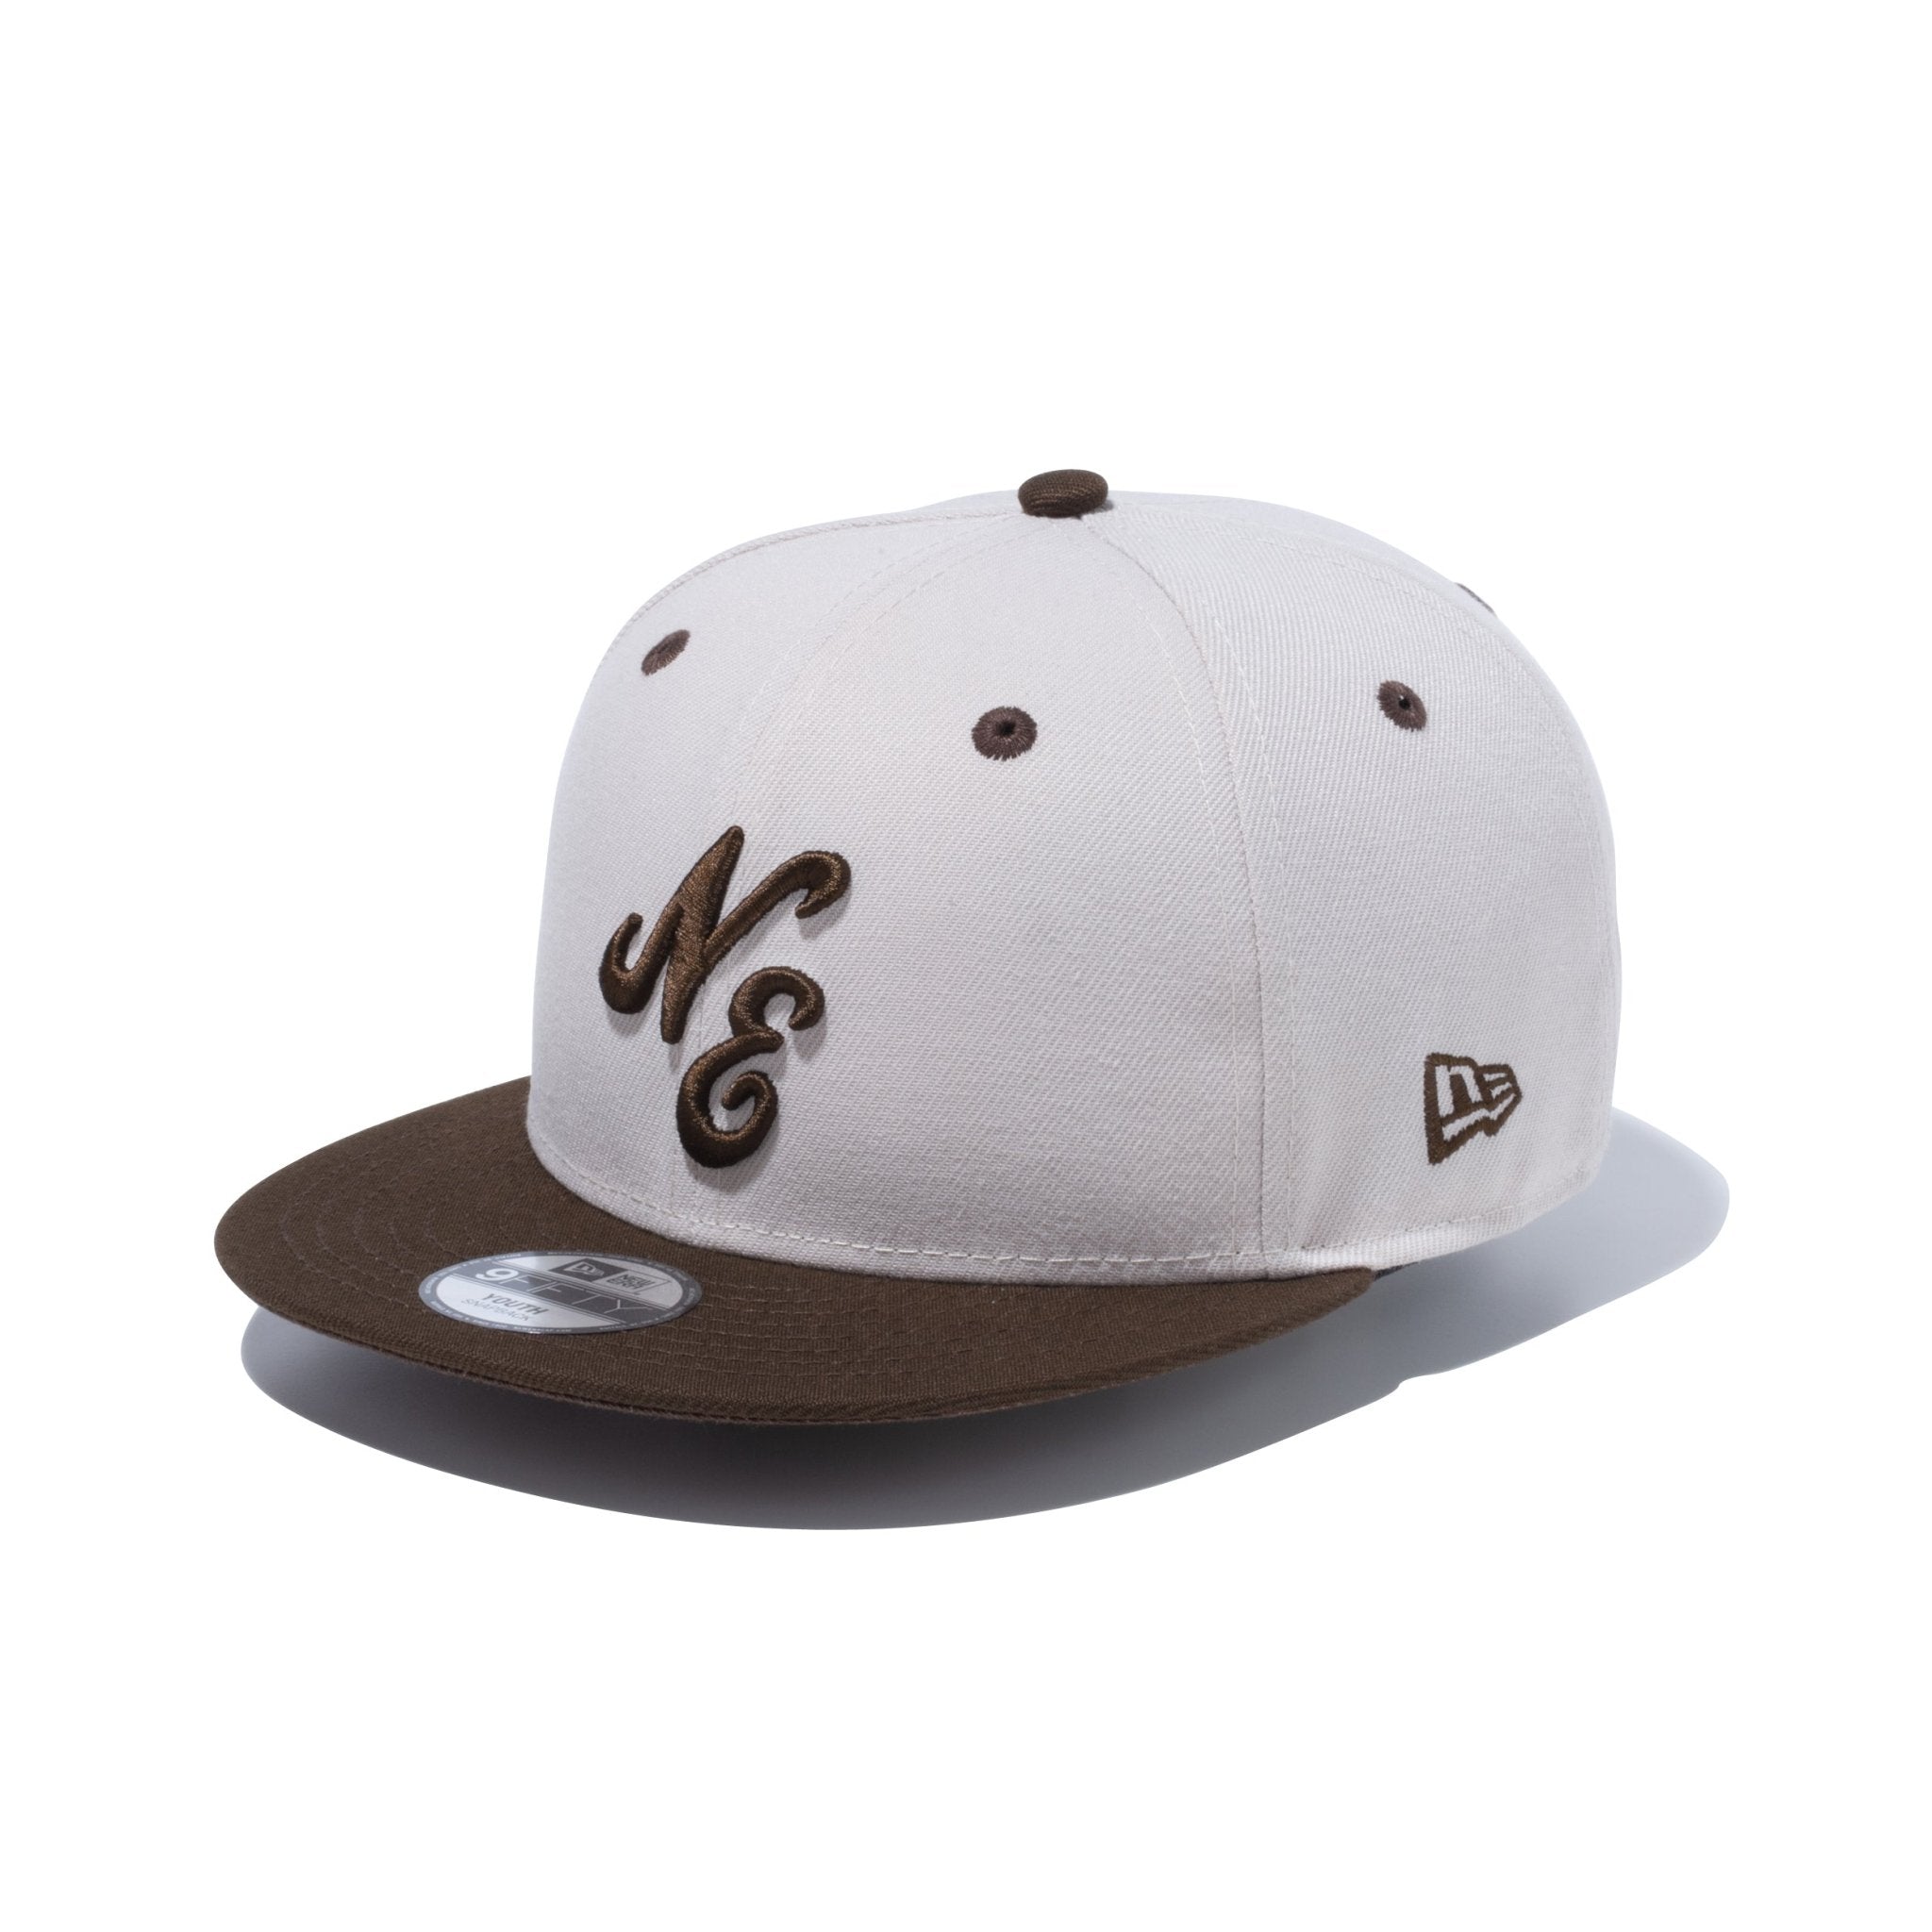 Youth 9FIFTY Classic Logo クラシックロゴ クラシックロゴ ストーン